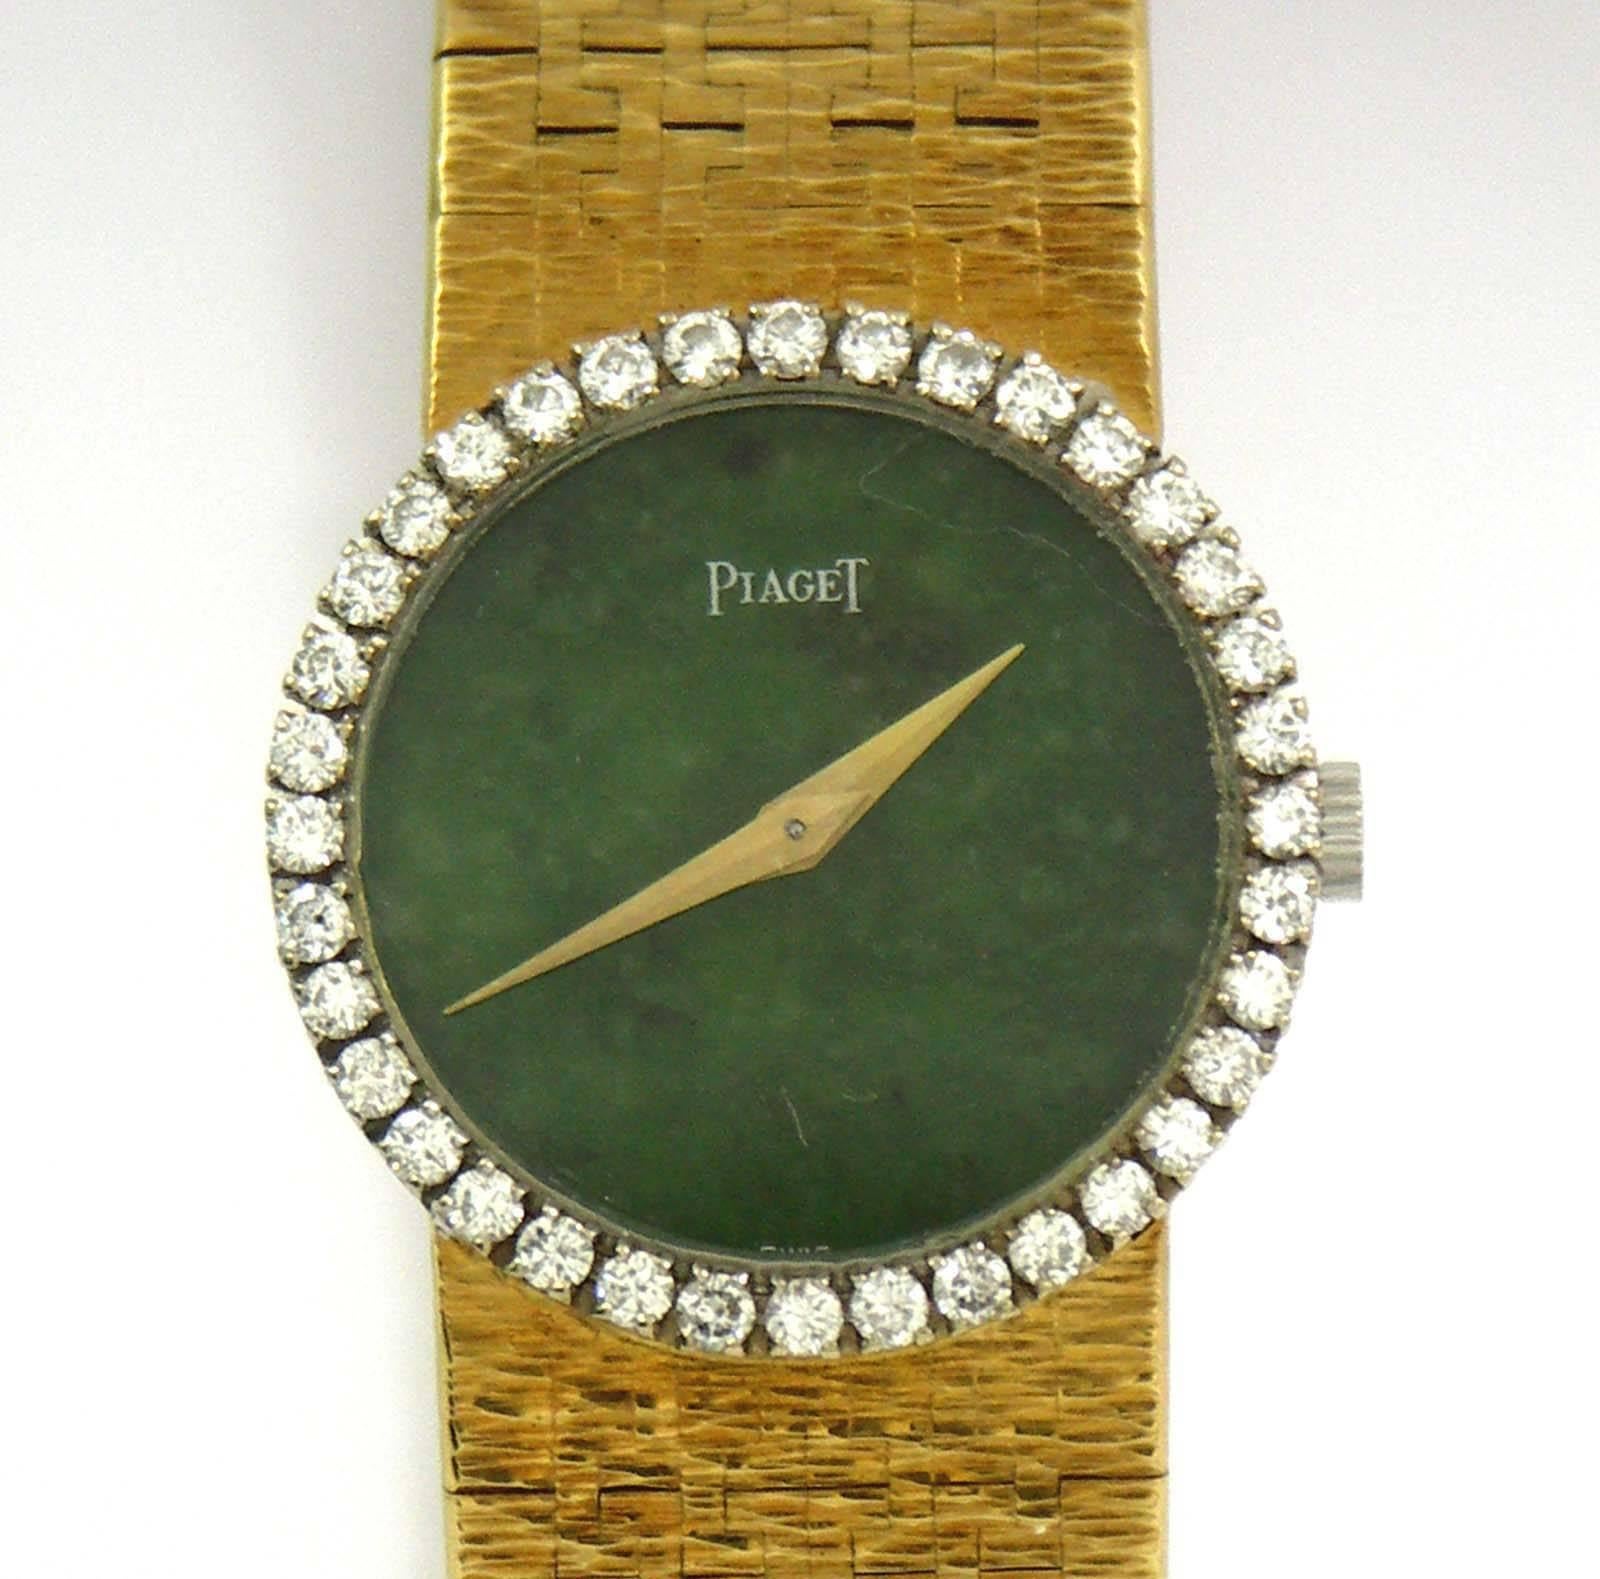 A lady's 18K yellow gold watch centered around a green jade dial, with a bezel measuring 24mm in diameter, and set with 30 round brilliant cut diamonds weighing 1.15ct total approximate weight. Signed Piaget